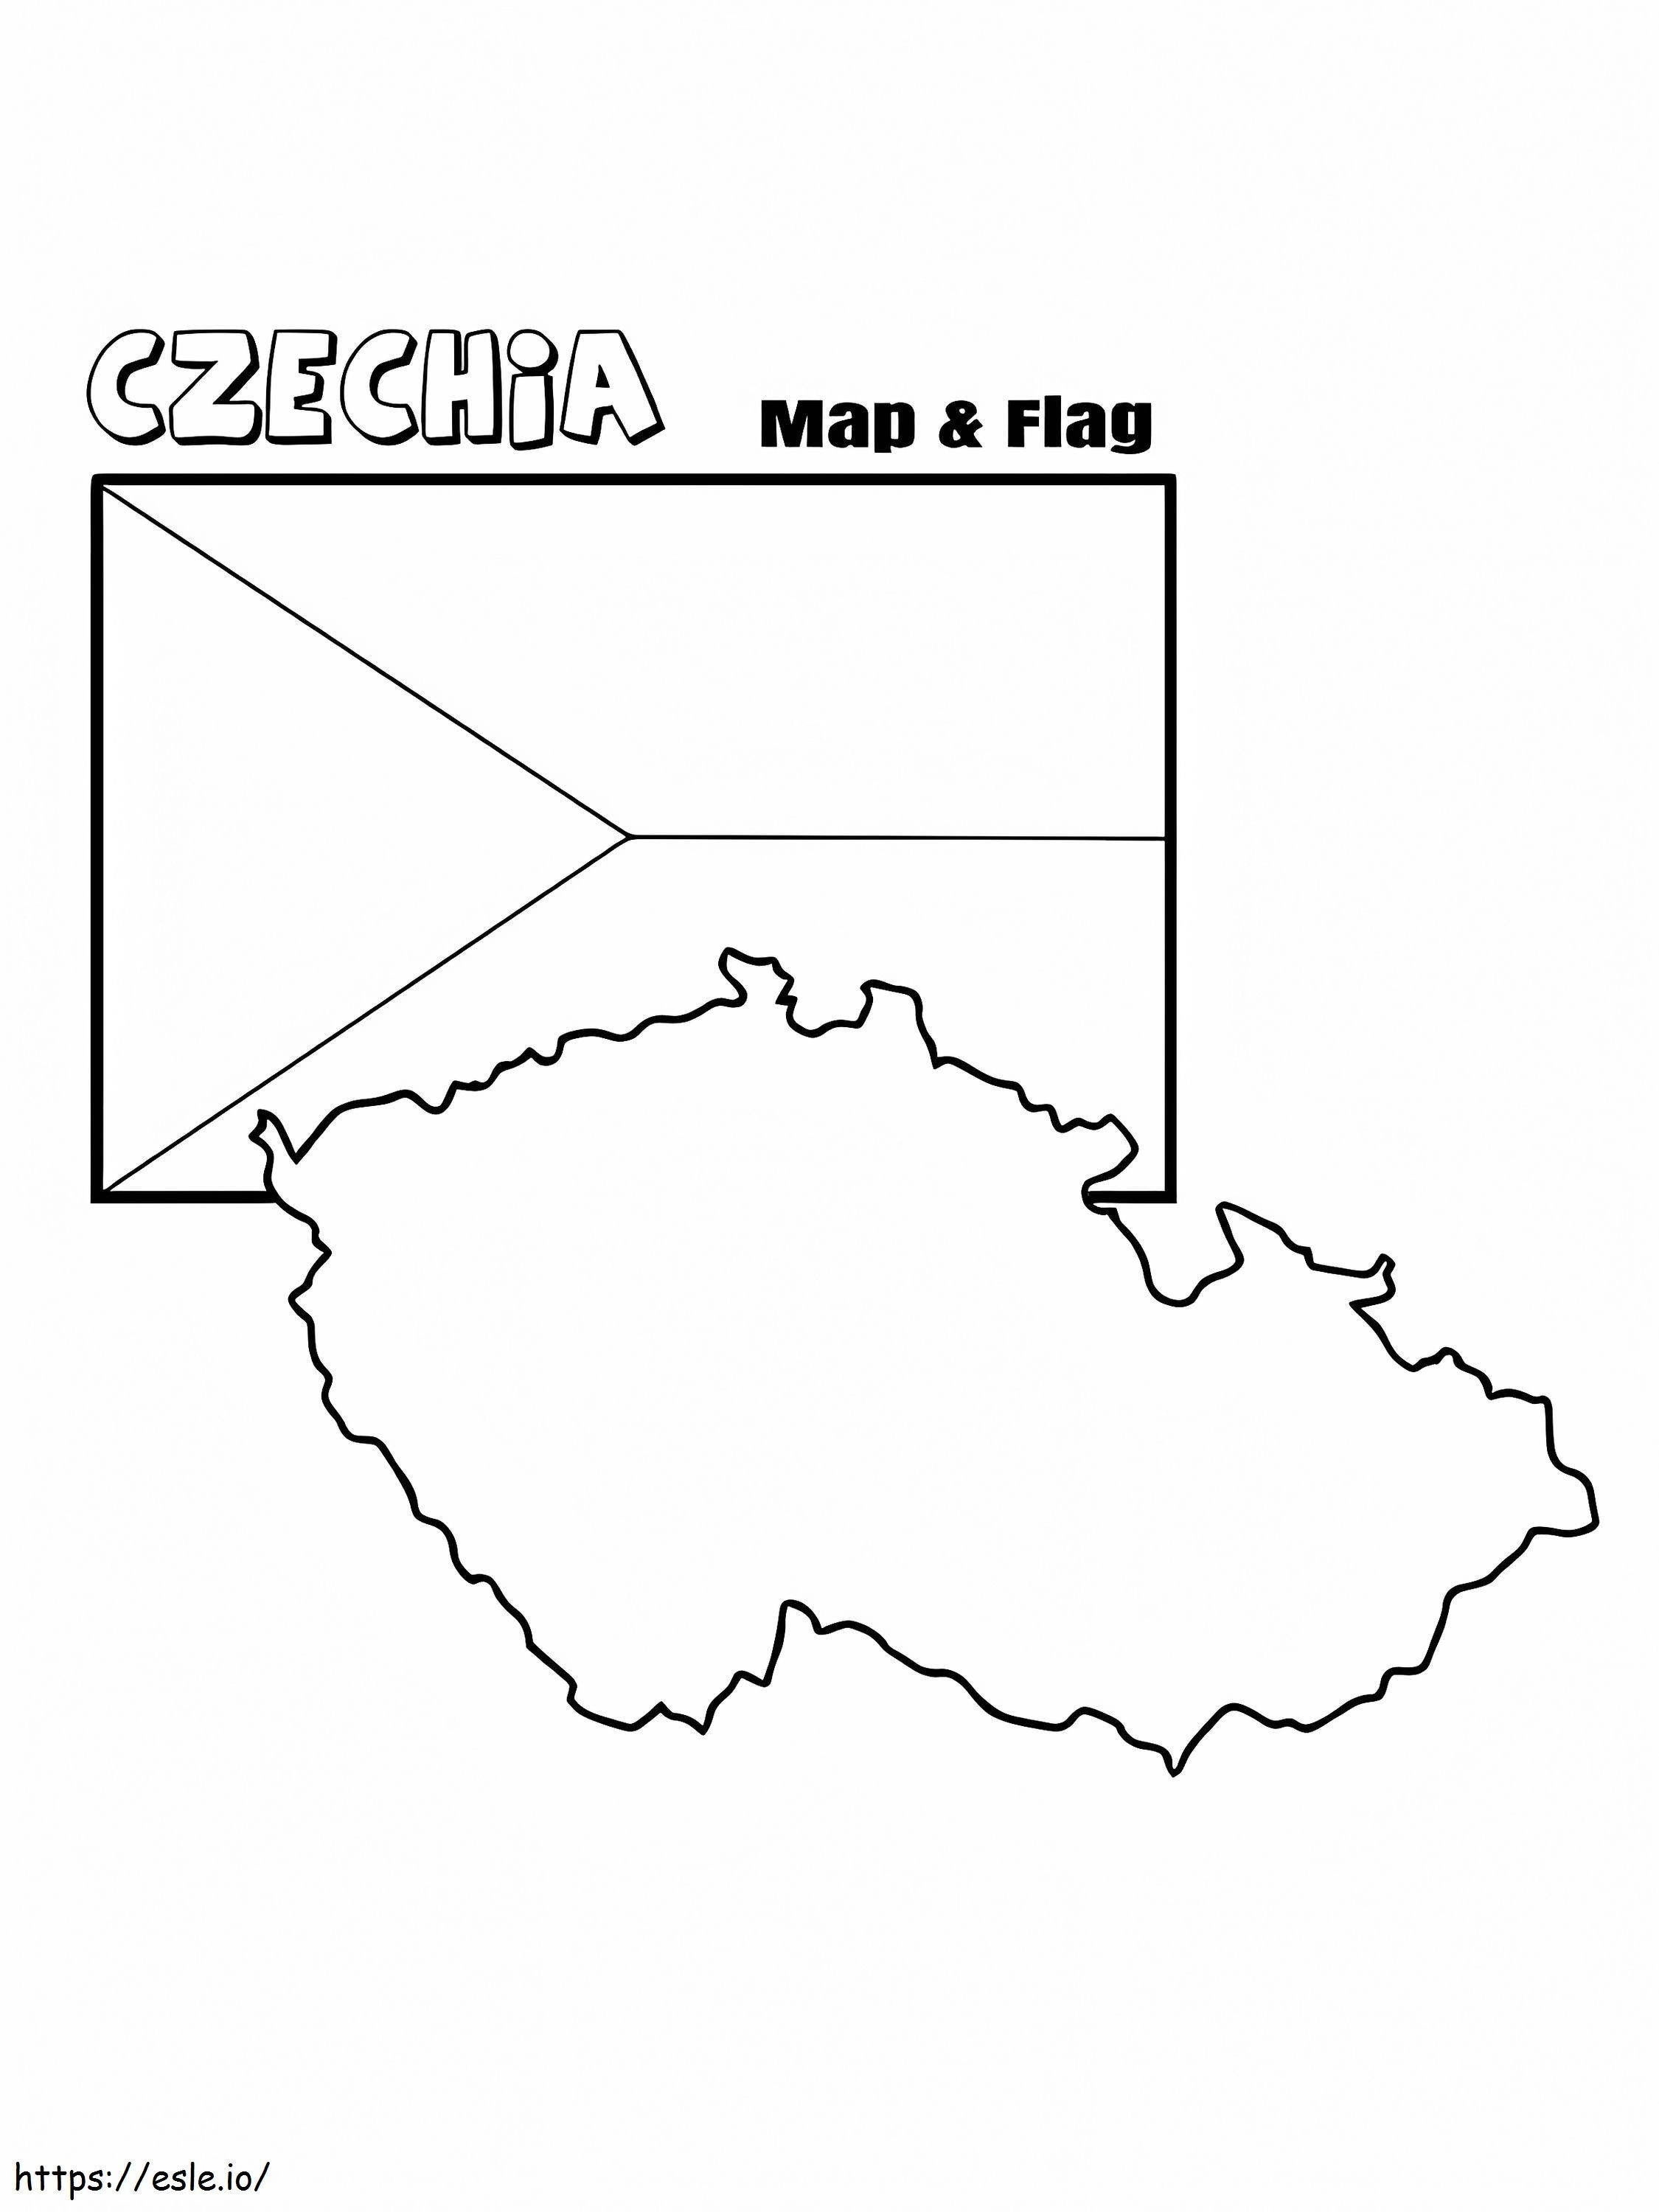 Czechia Flag And Map coloring page